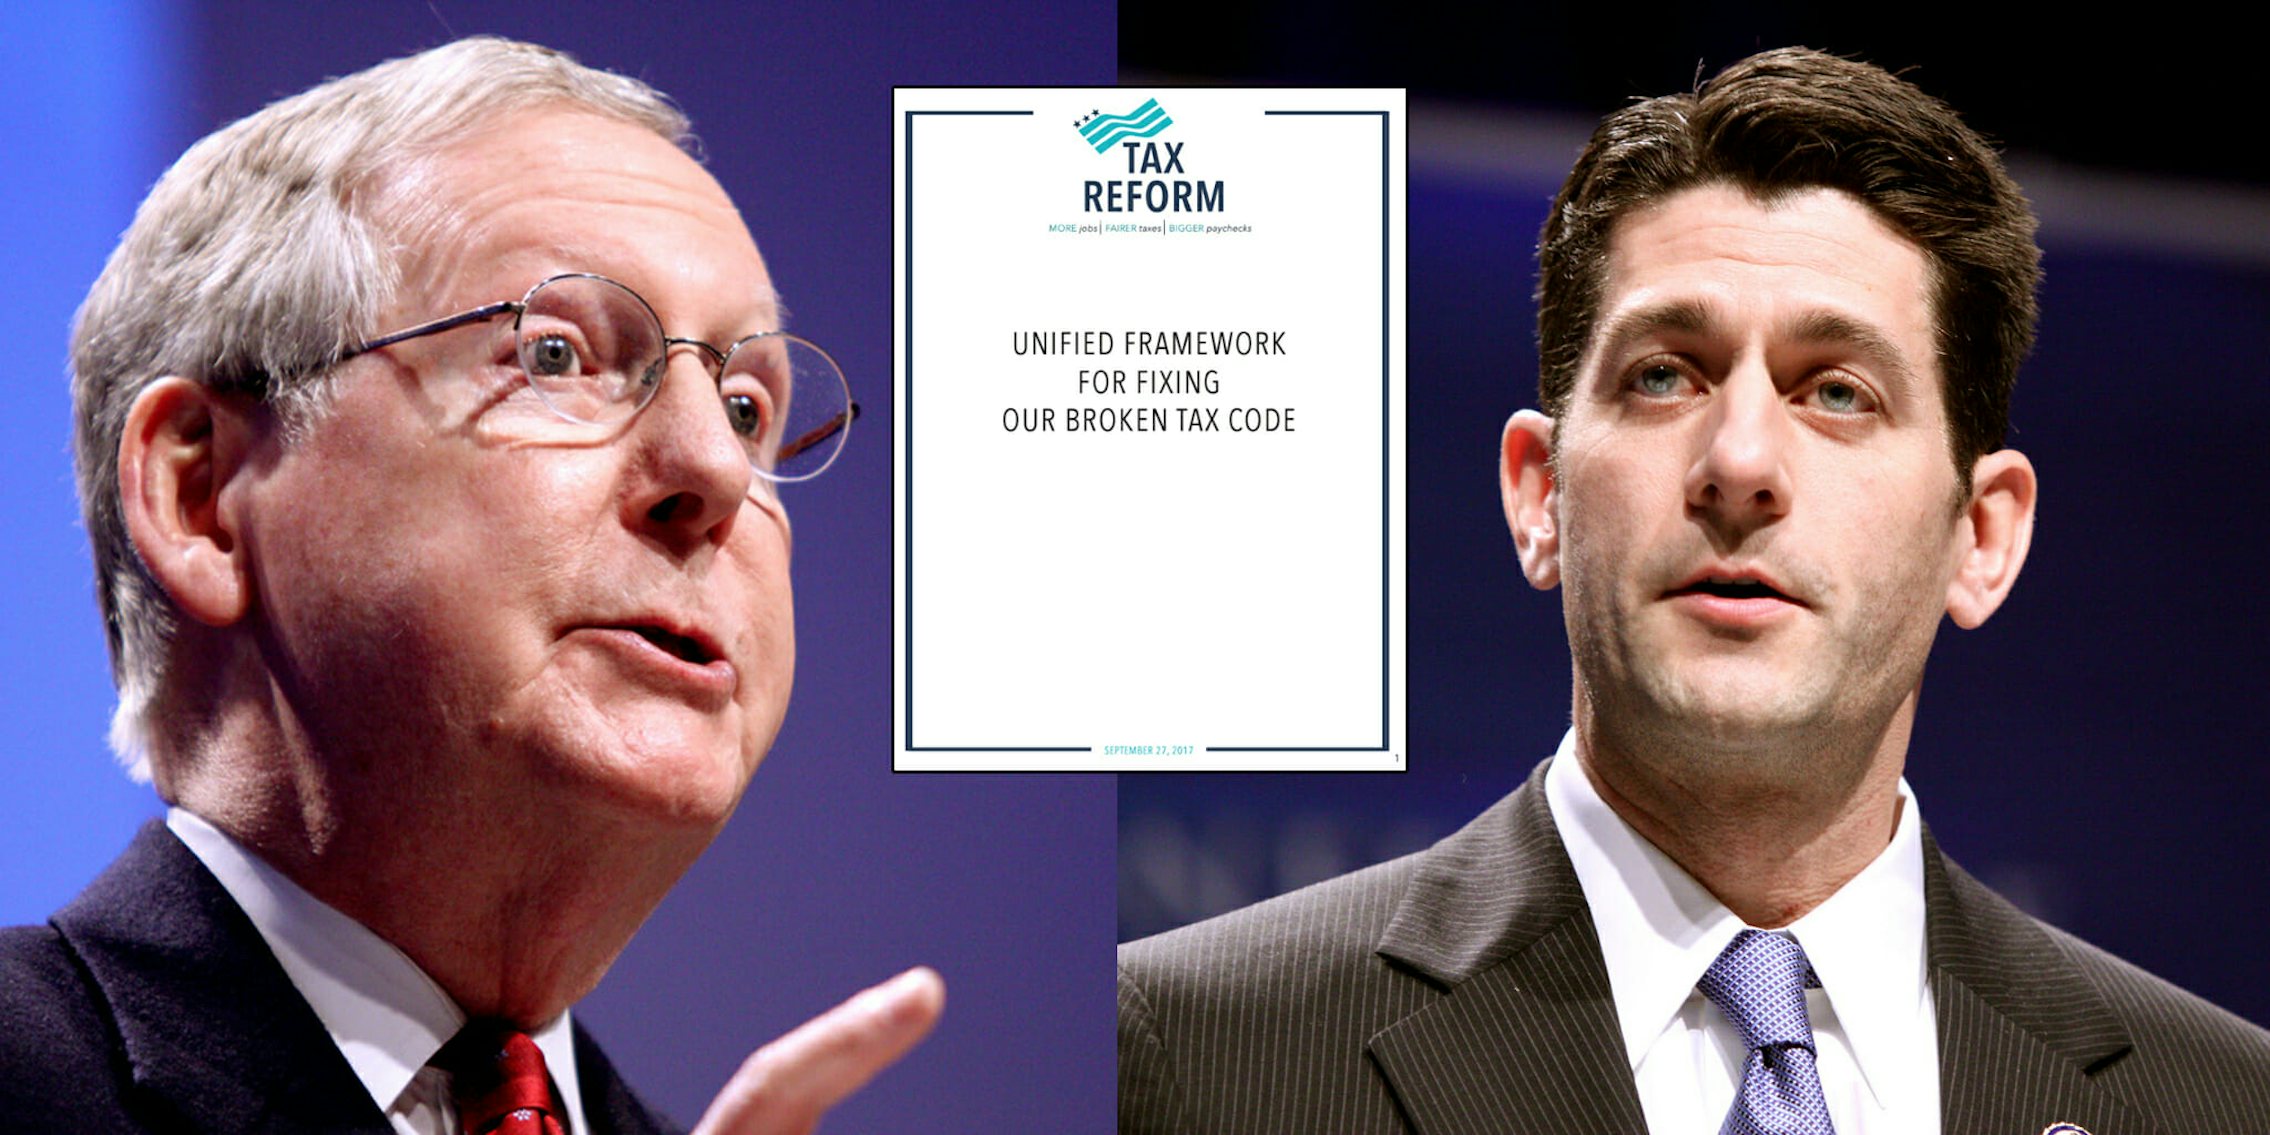 Mitch McConnell and Paul Ryan were among those who worked on the Republican's tax reform proposal unveiled on Wednesday.